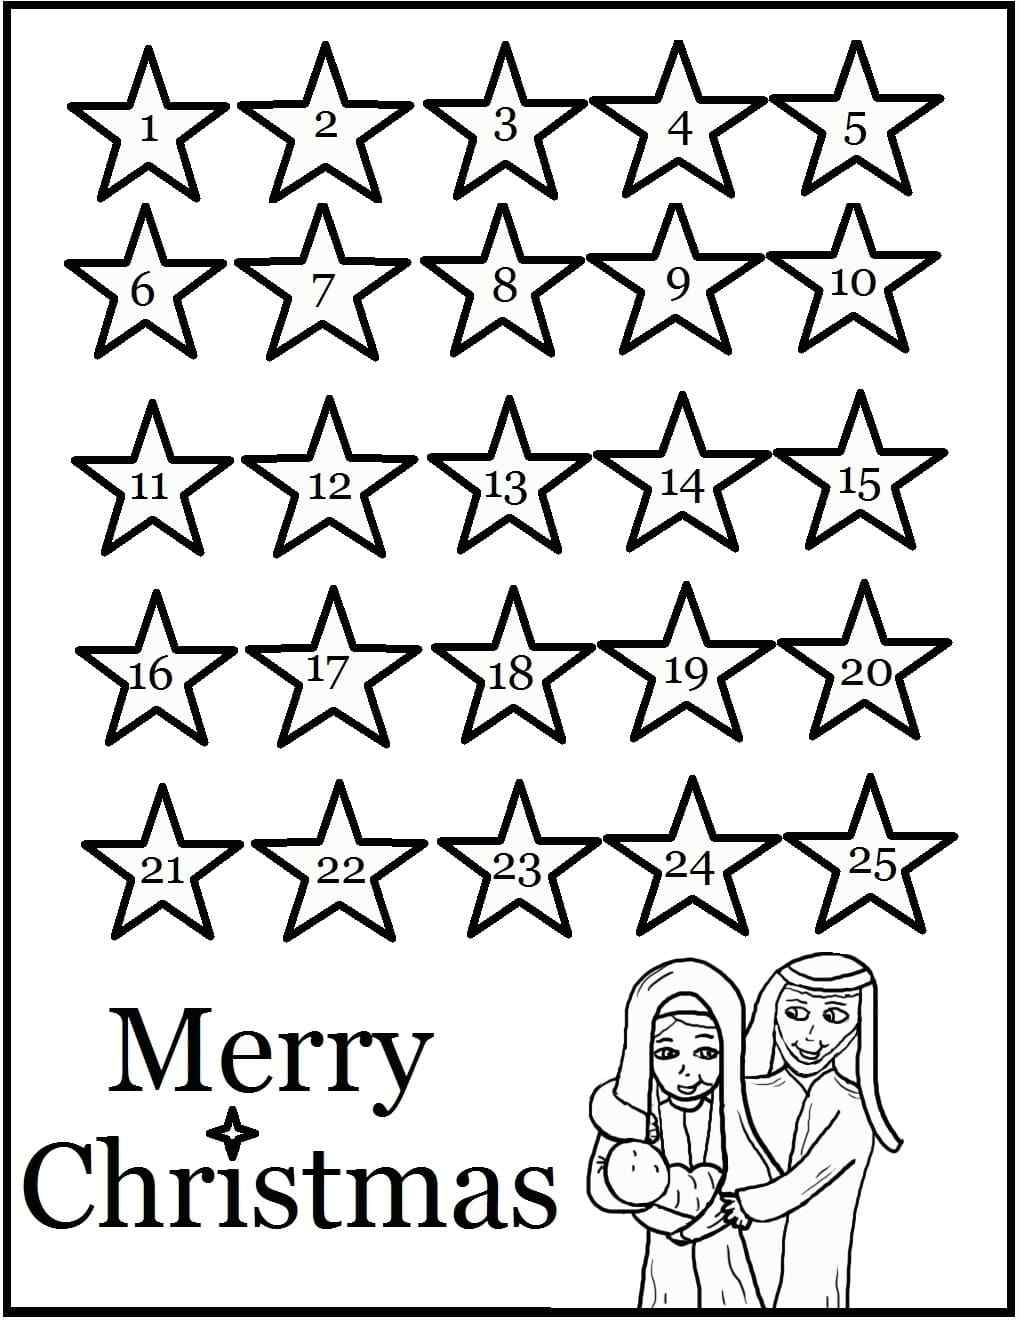 Advent Calendar With Bright Stars Coloring Page